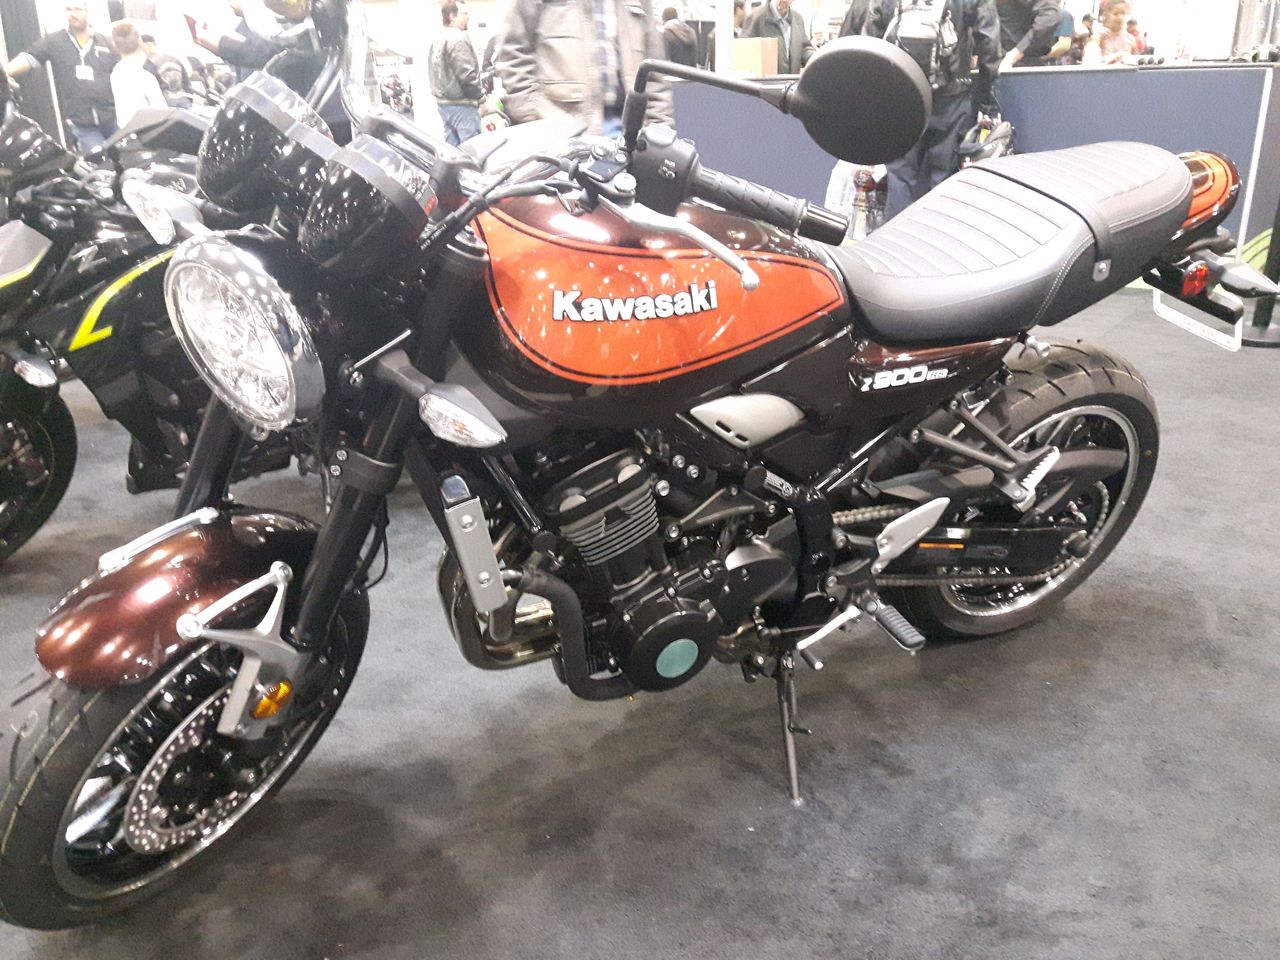 picture from motorcycle show. My machine is currently in storage, so no pictures of it just yet.